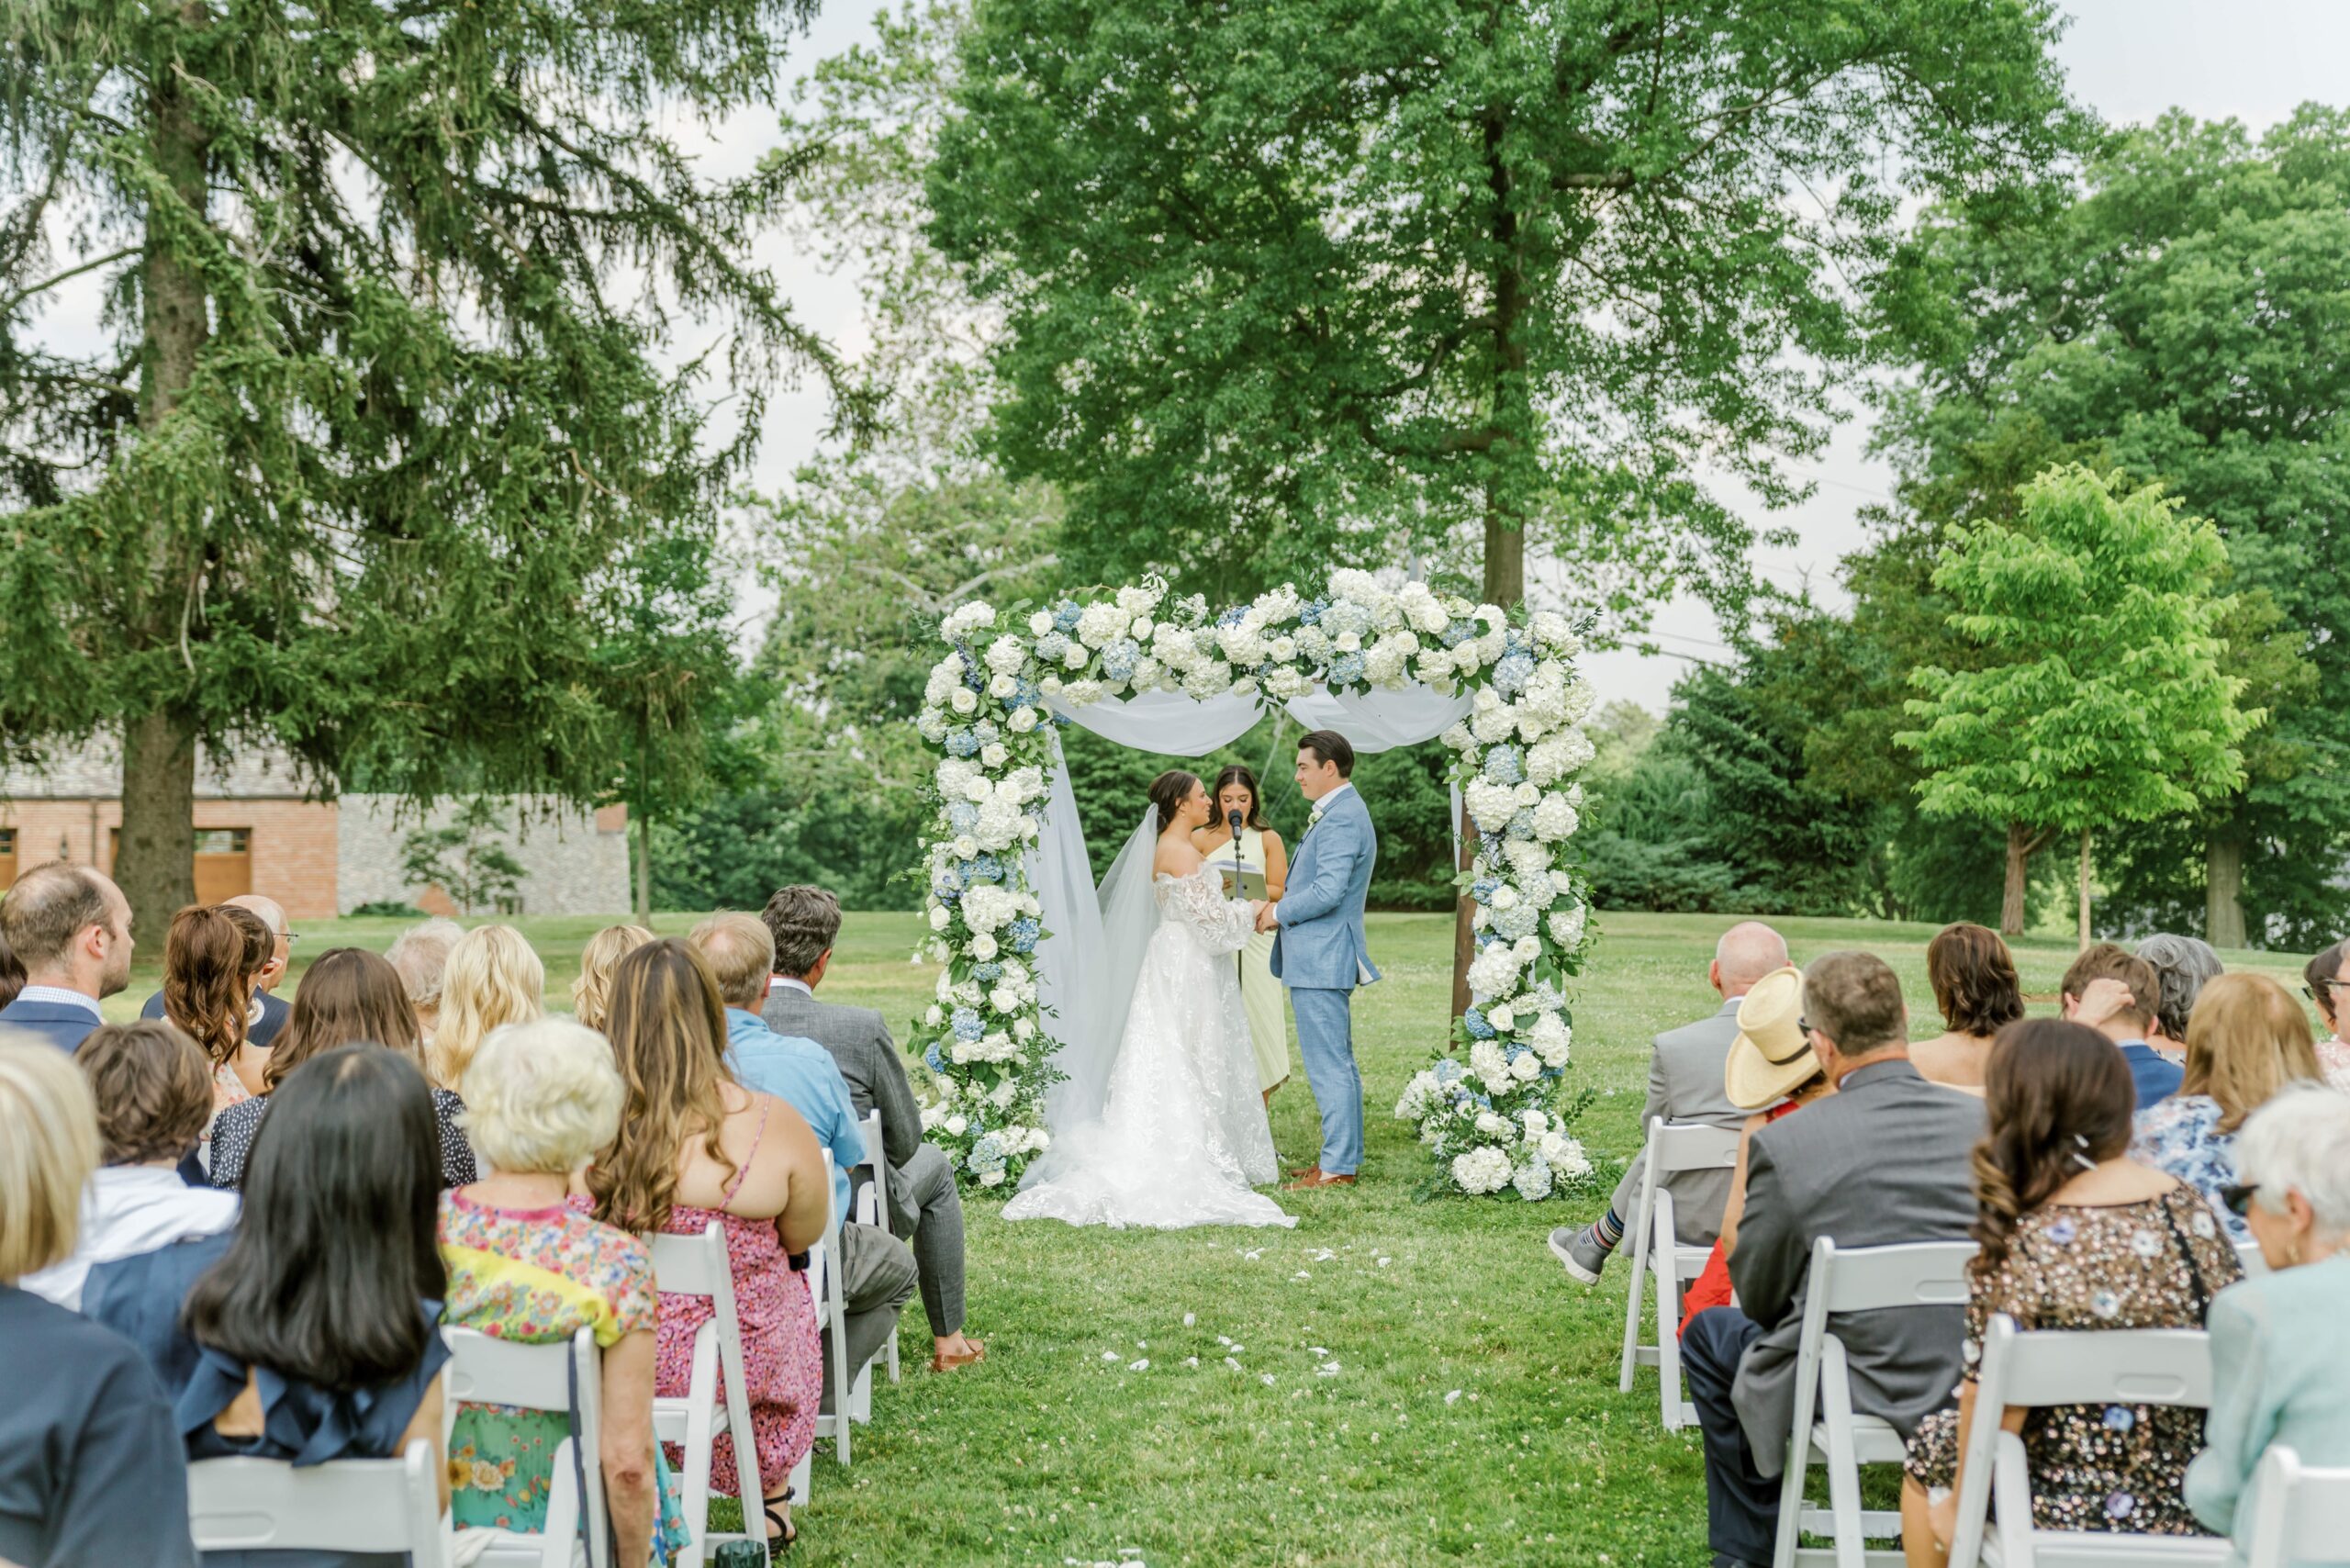 Outdoor wedding ceremony at a private estate in Pittsburgh